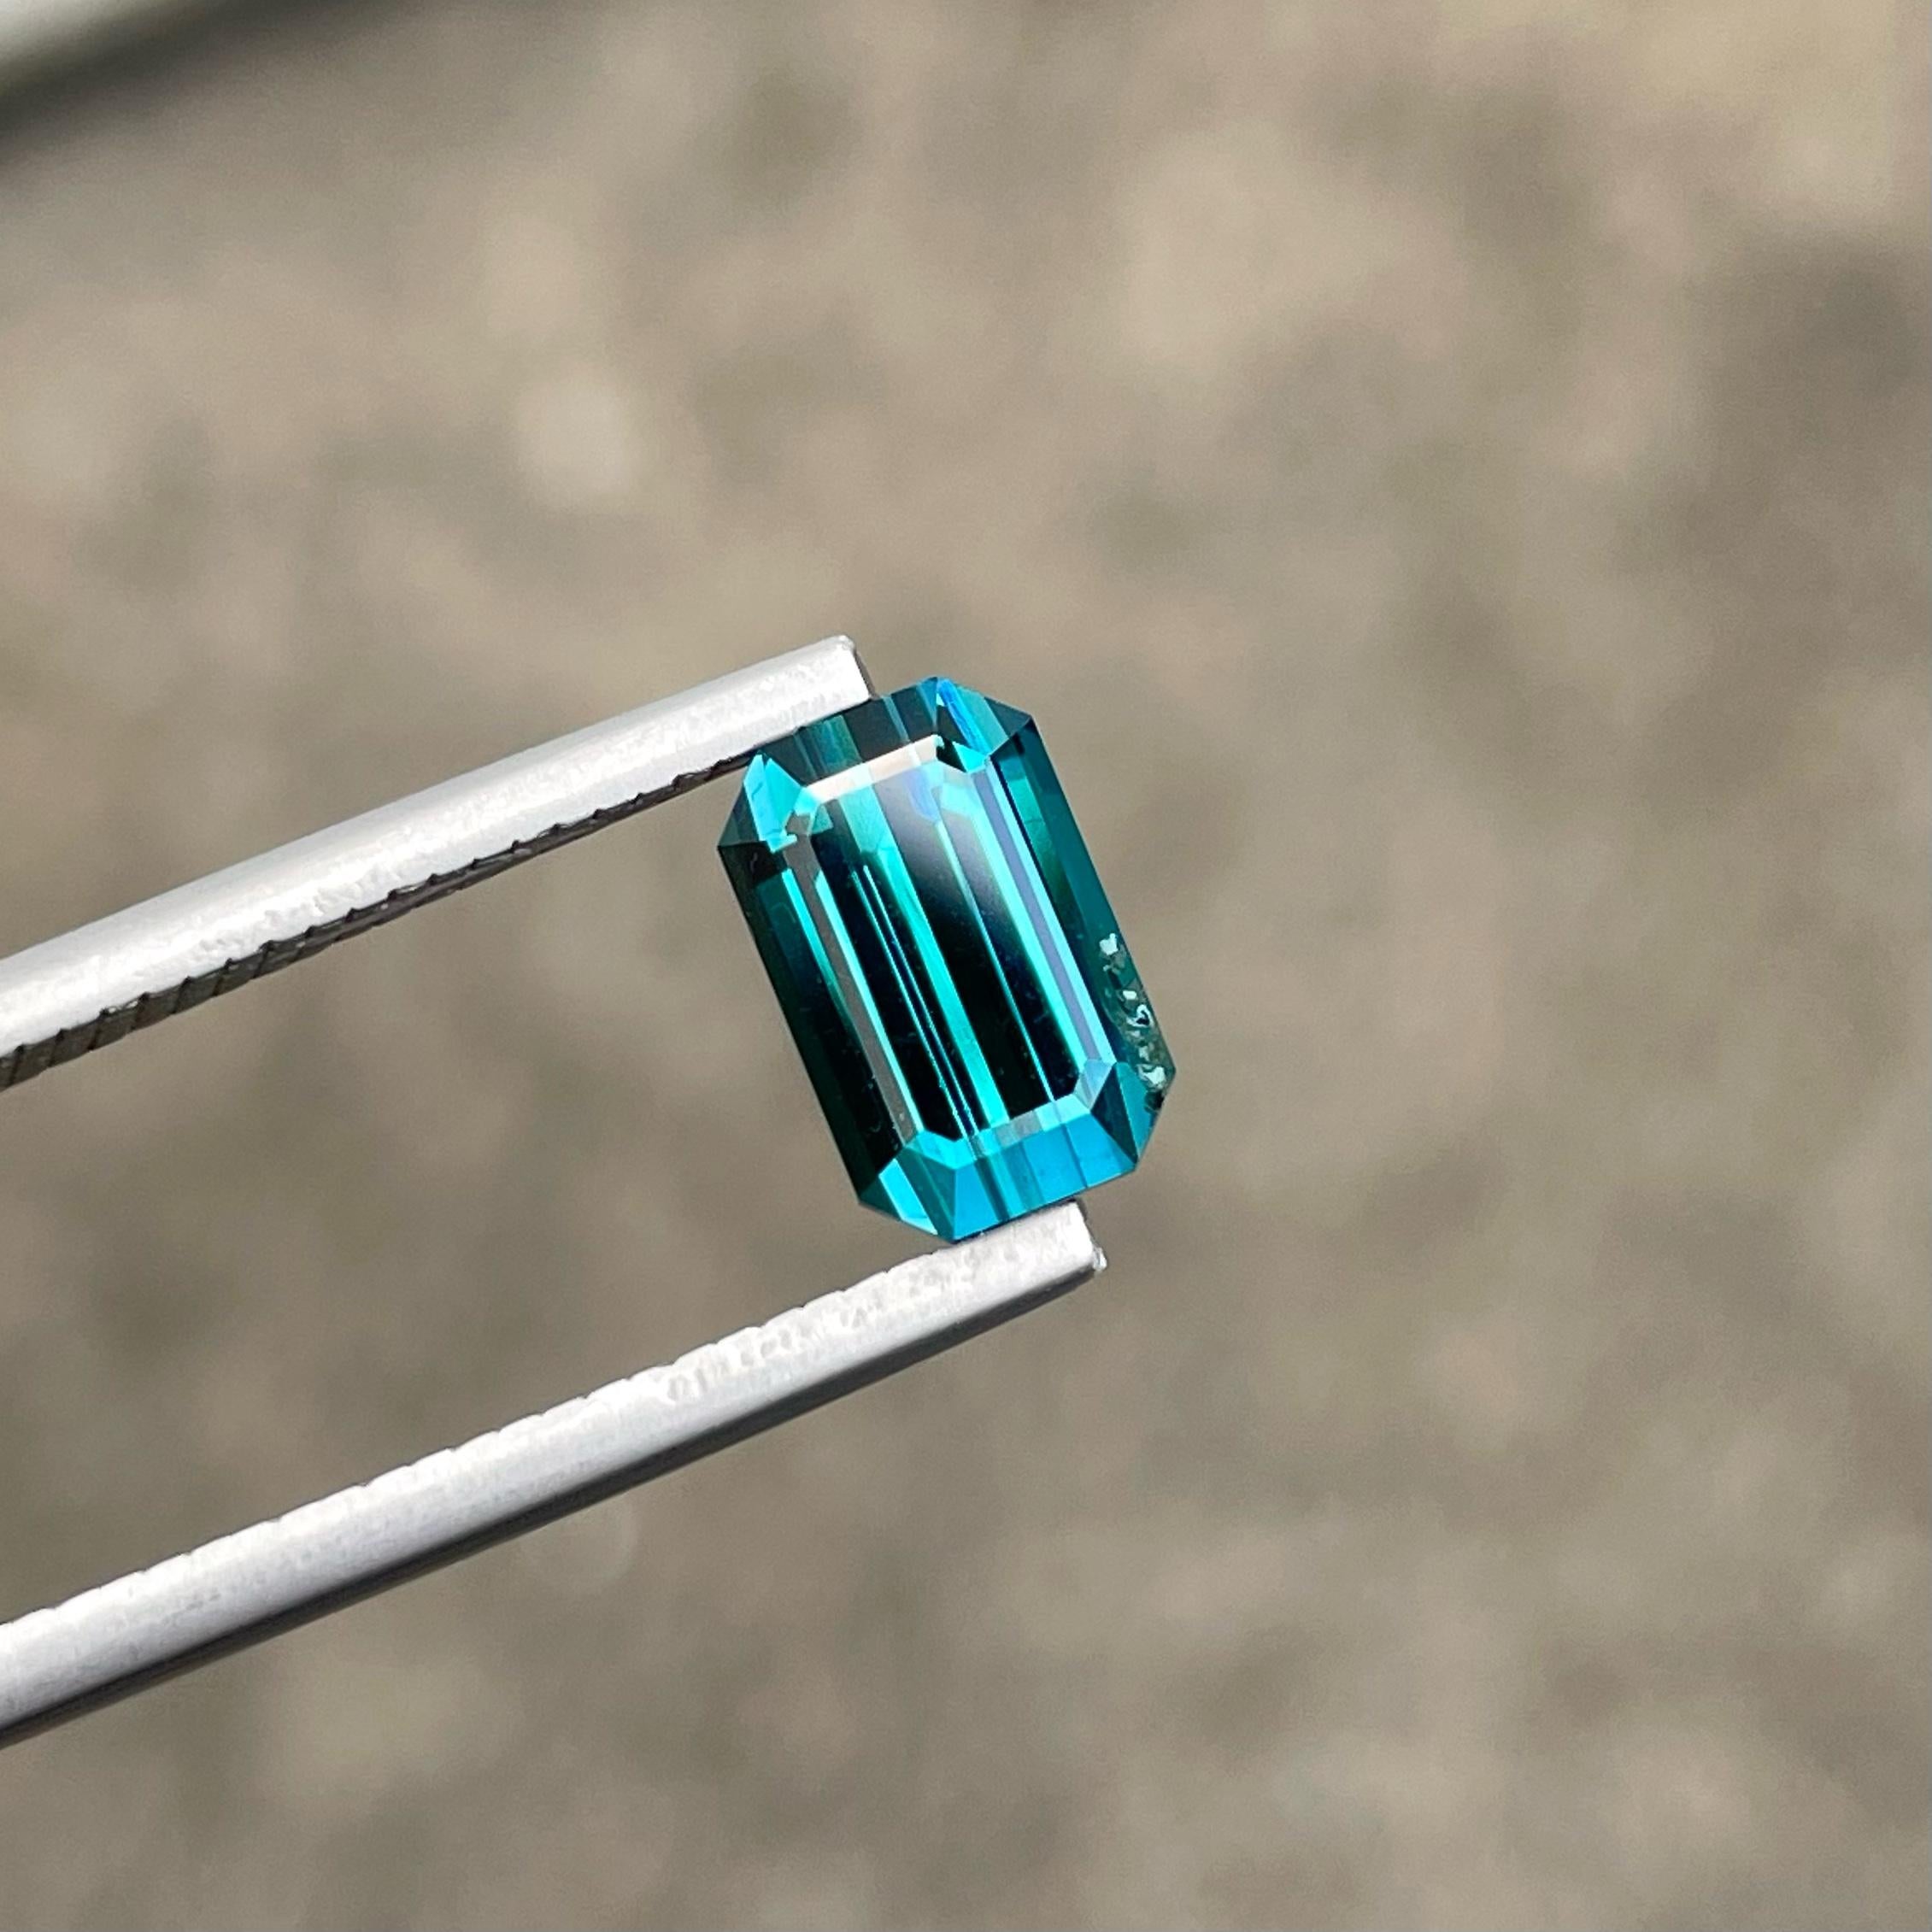 Weight 2.20 carats 
Dimensions 8.9 x 5.7 x 4.8 mm
Treatment None 
Origin Afghanistan 
Clarity VVS (Very, Very Slightly Included)
Shape Octagon 
Cut Emerald


Immerse yourself in the world of deep blue tourmaline, renowned for its mesmerizing color